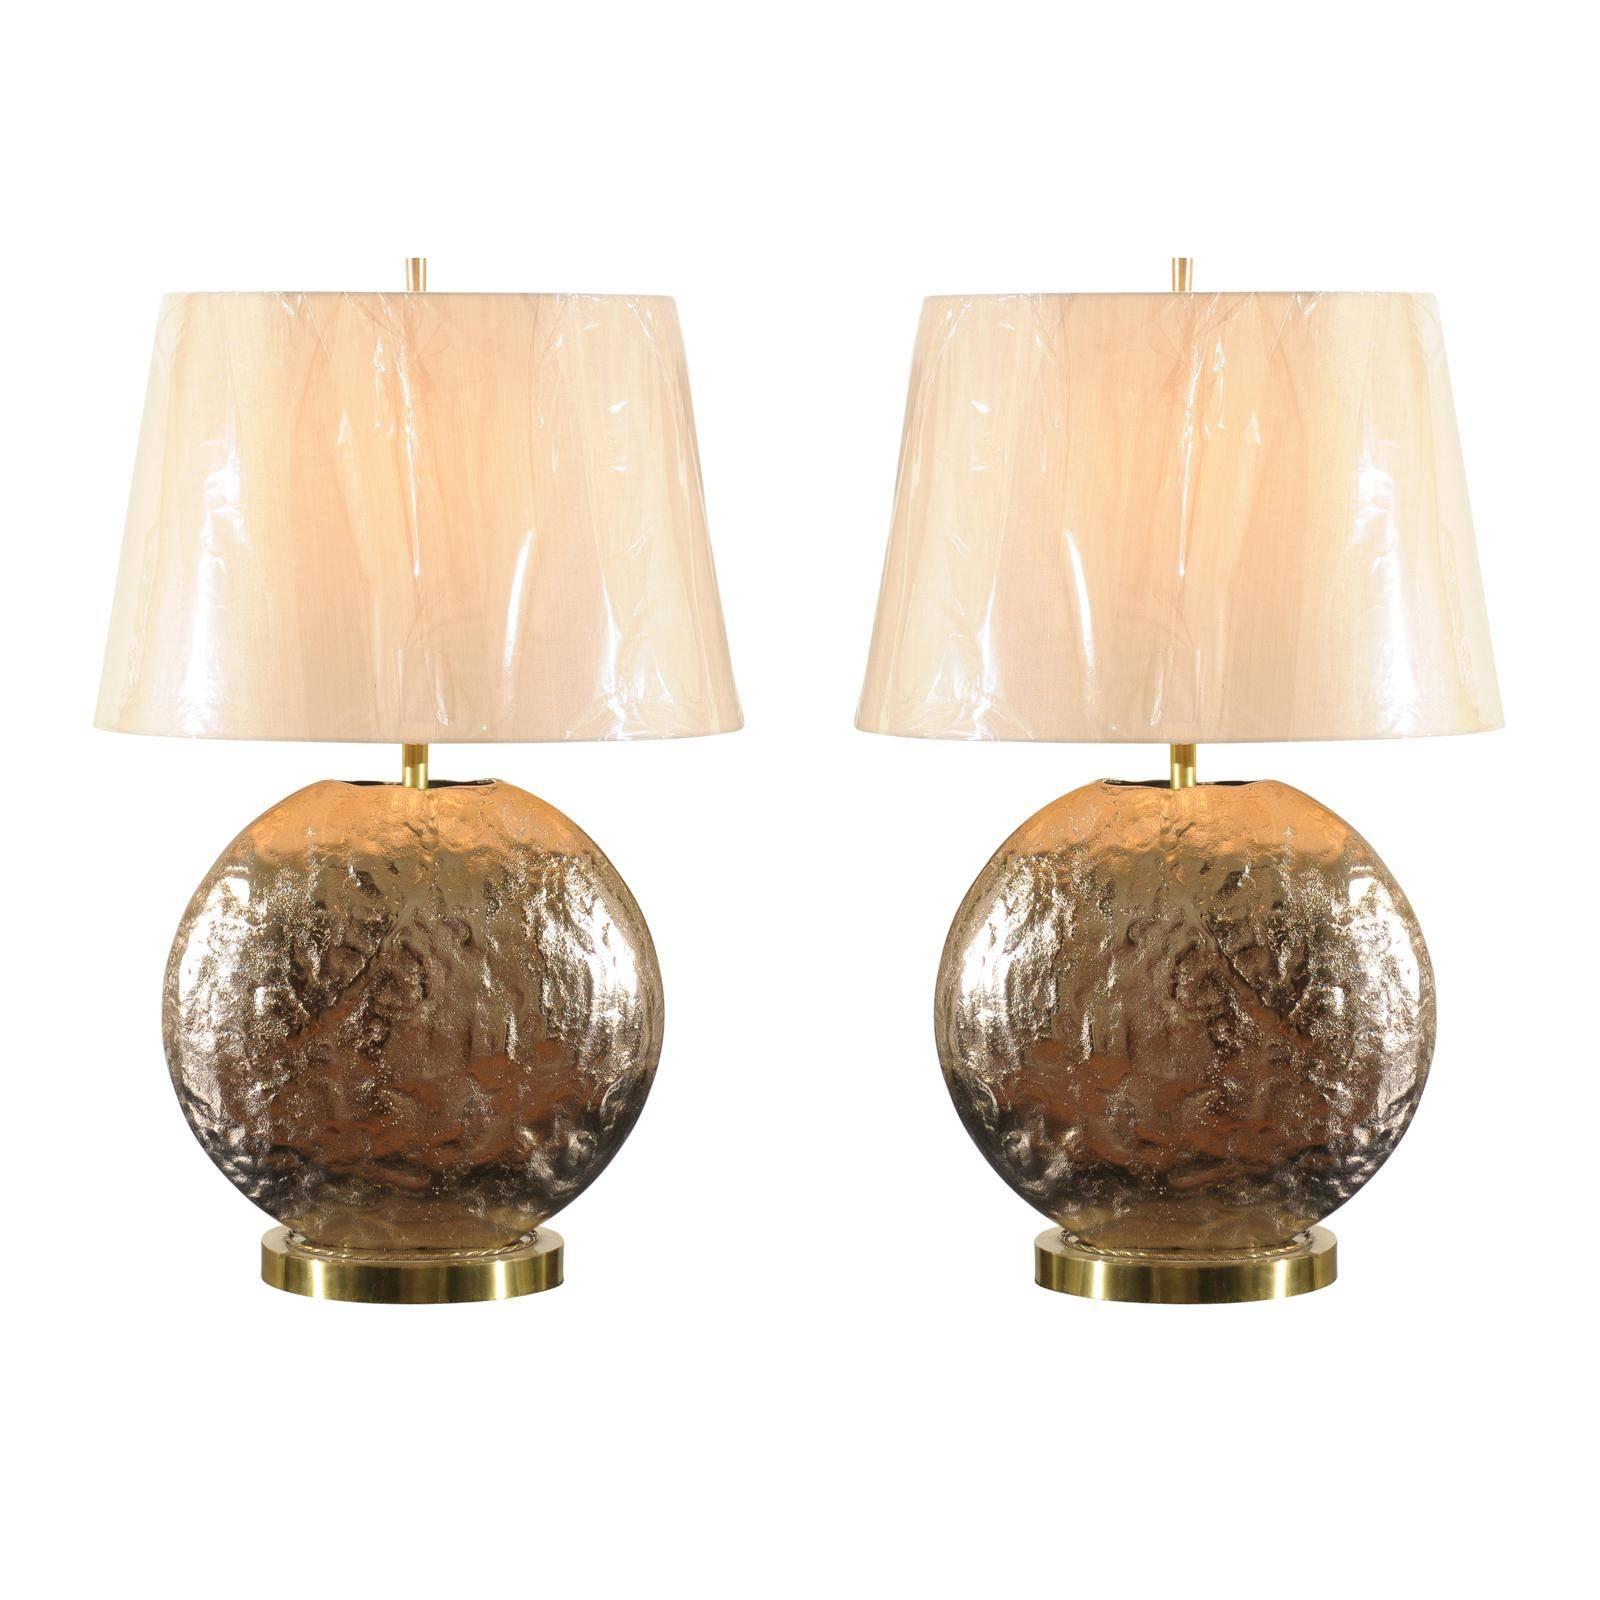 Restored Pair of Vintage Textured Steel and Brass Medallion Lamps